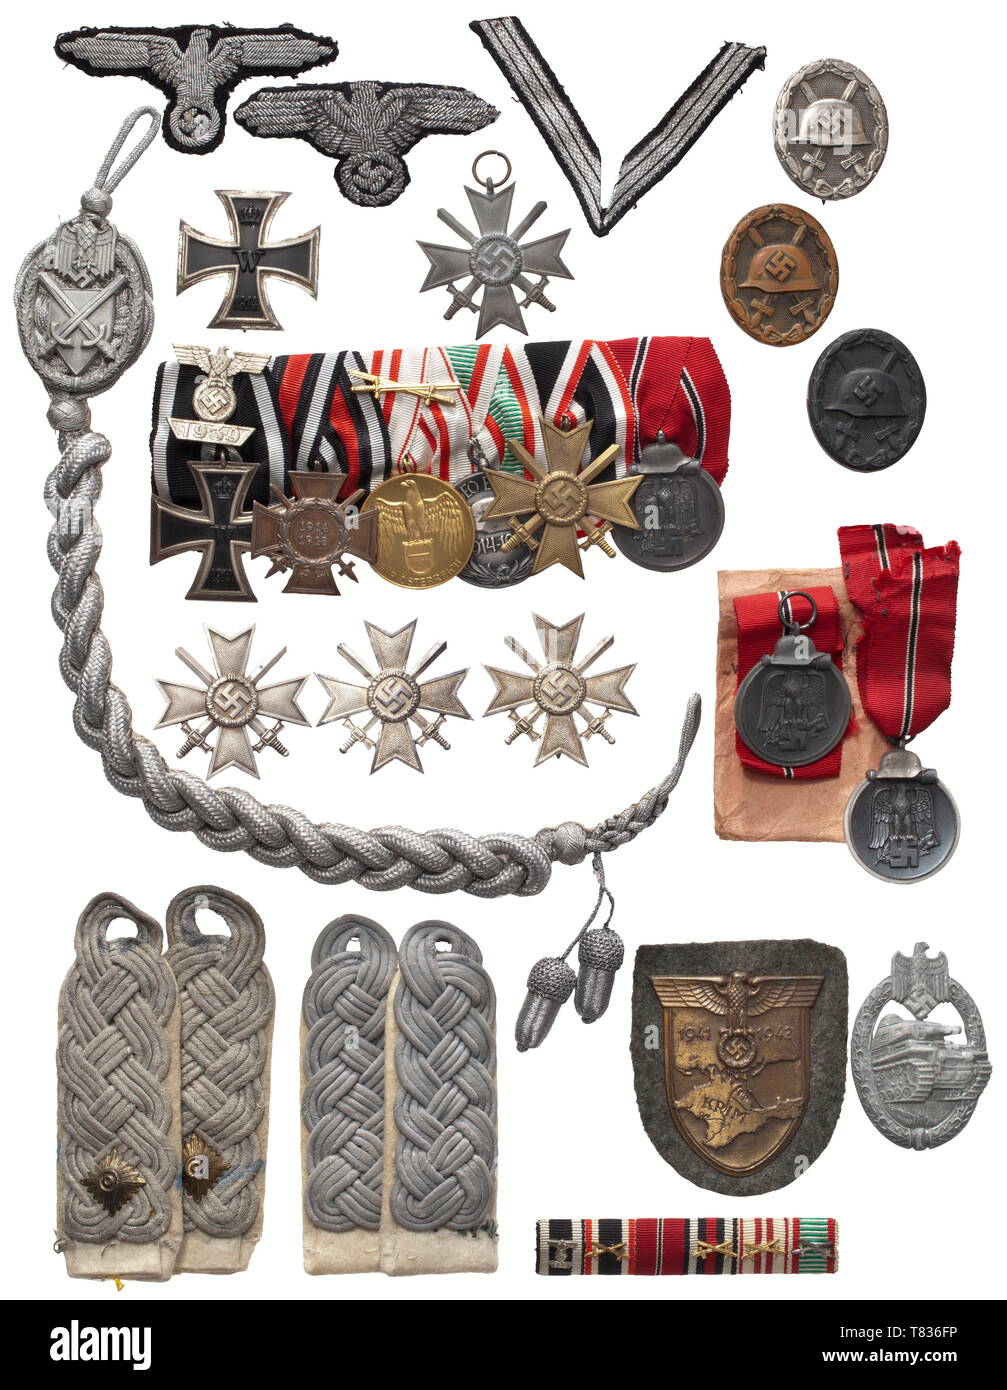 The estate of Hauptsturmführer Arthur Erdmann Large six-piece orders clasp (Iron Cross 2nd Class of 1914 with Repetition Clasp of 1939, Honour Cross of the World War 1914/18 for Combatants, Austrian and Hungarian War Commemorative Medals, War Merit Cross with Swords, Eastern Front Medal) with corresponding field orders clasp, an Iron Cross 1st Class of 1914 (piece from the 1930s), three War Merit Crosses 1st Class (each of silvered non-ferrous metal, two with maker 'L/11', '1'), a Panzer Assault Badge in Silver (zinc, maker 'R.K.'), a Krim Shield (paper missing), a War Meri, Editorial-Use-Only Stock Photo